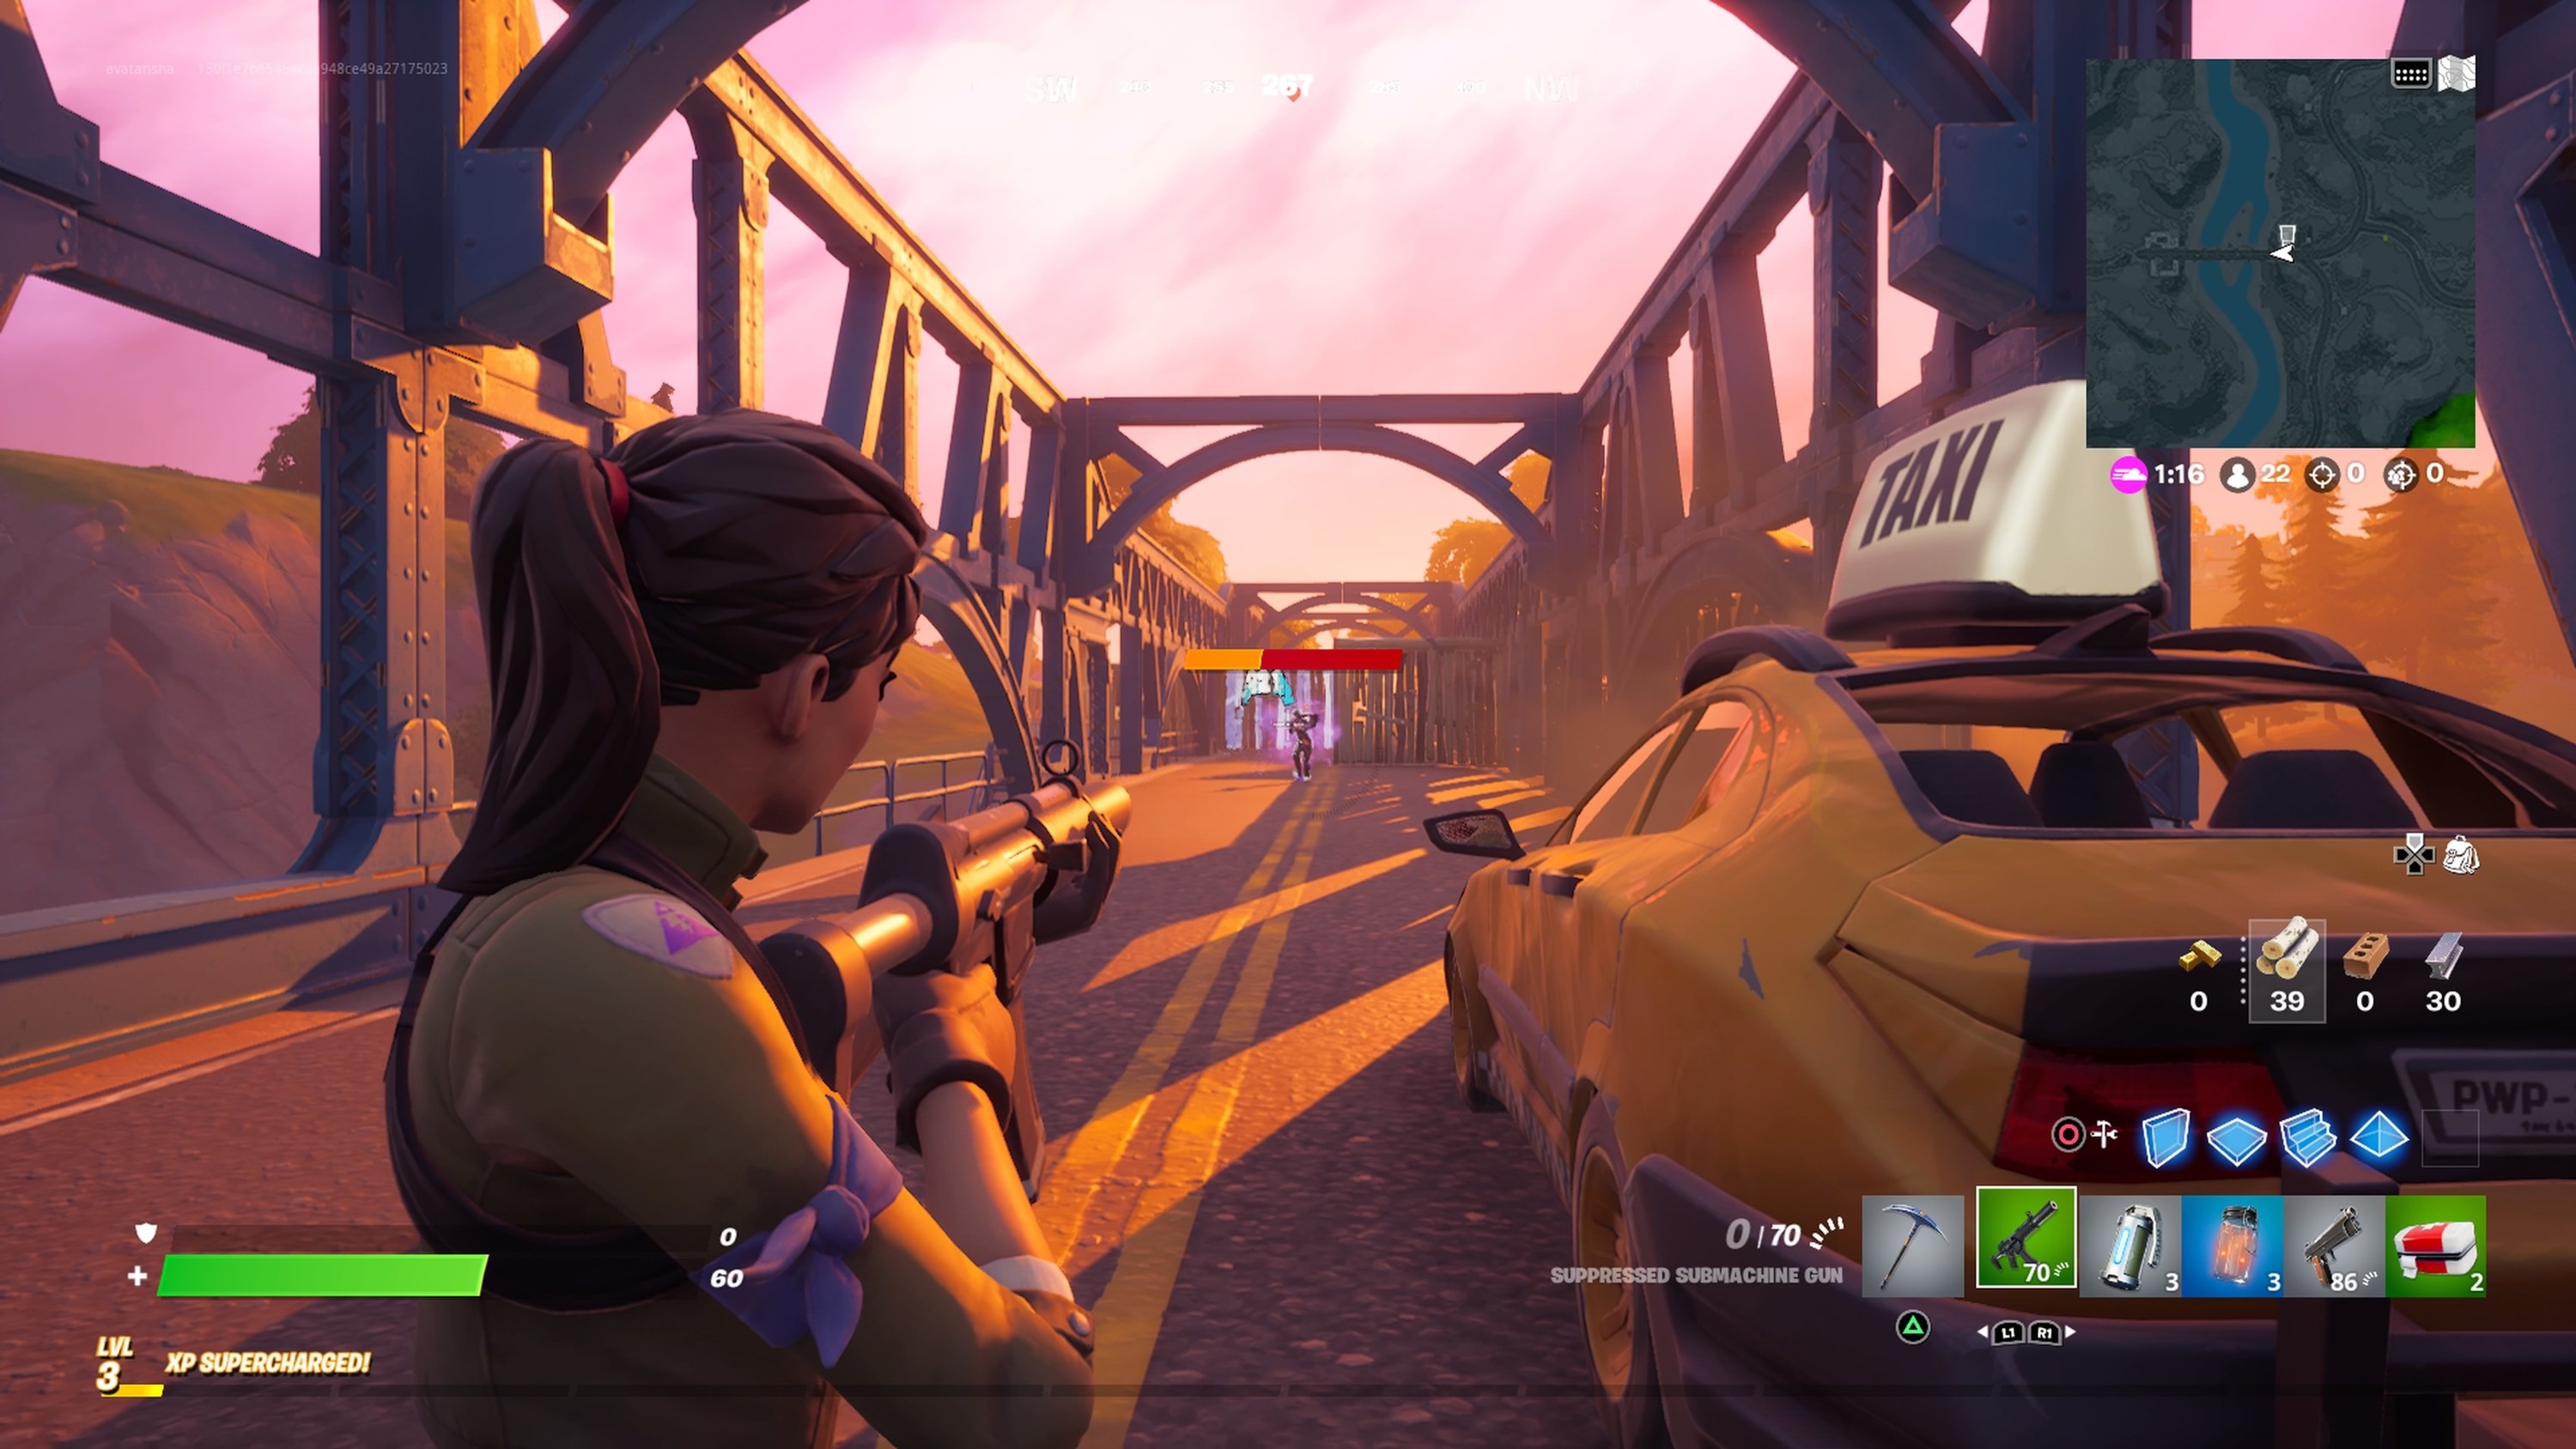 A Fortnite character standing on a bridge; they are aiming their gun at another player in the distance